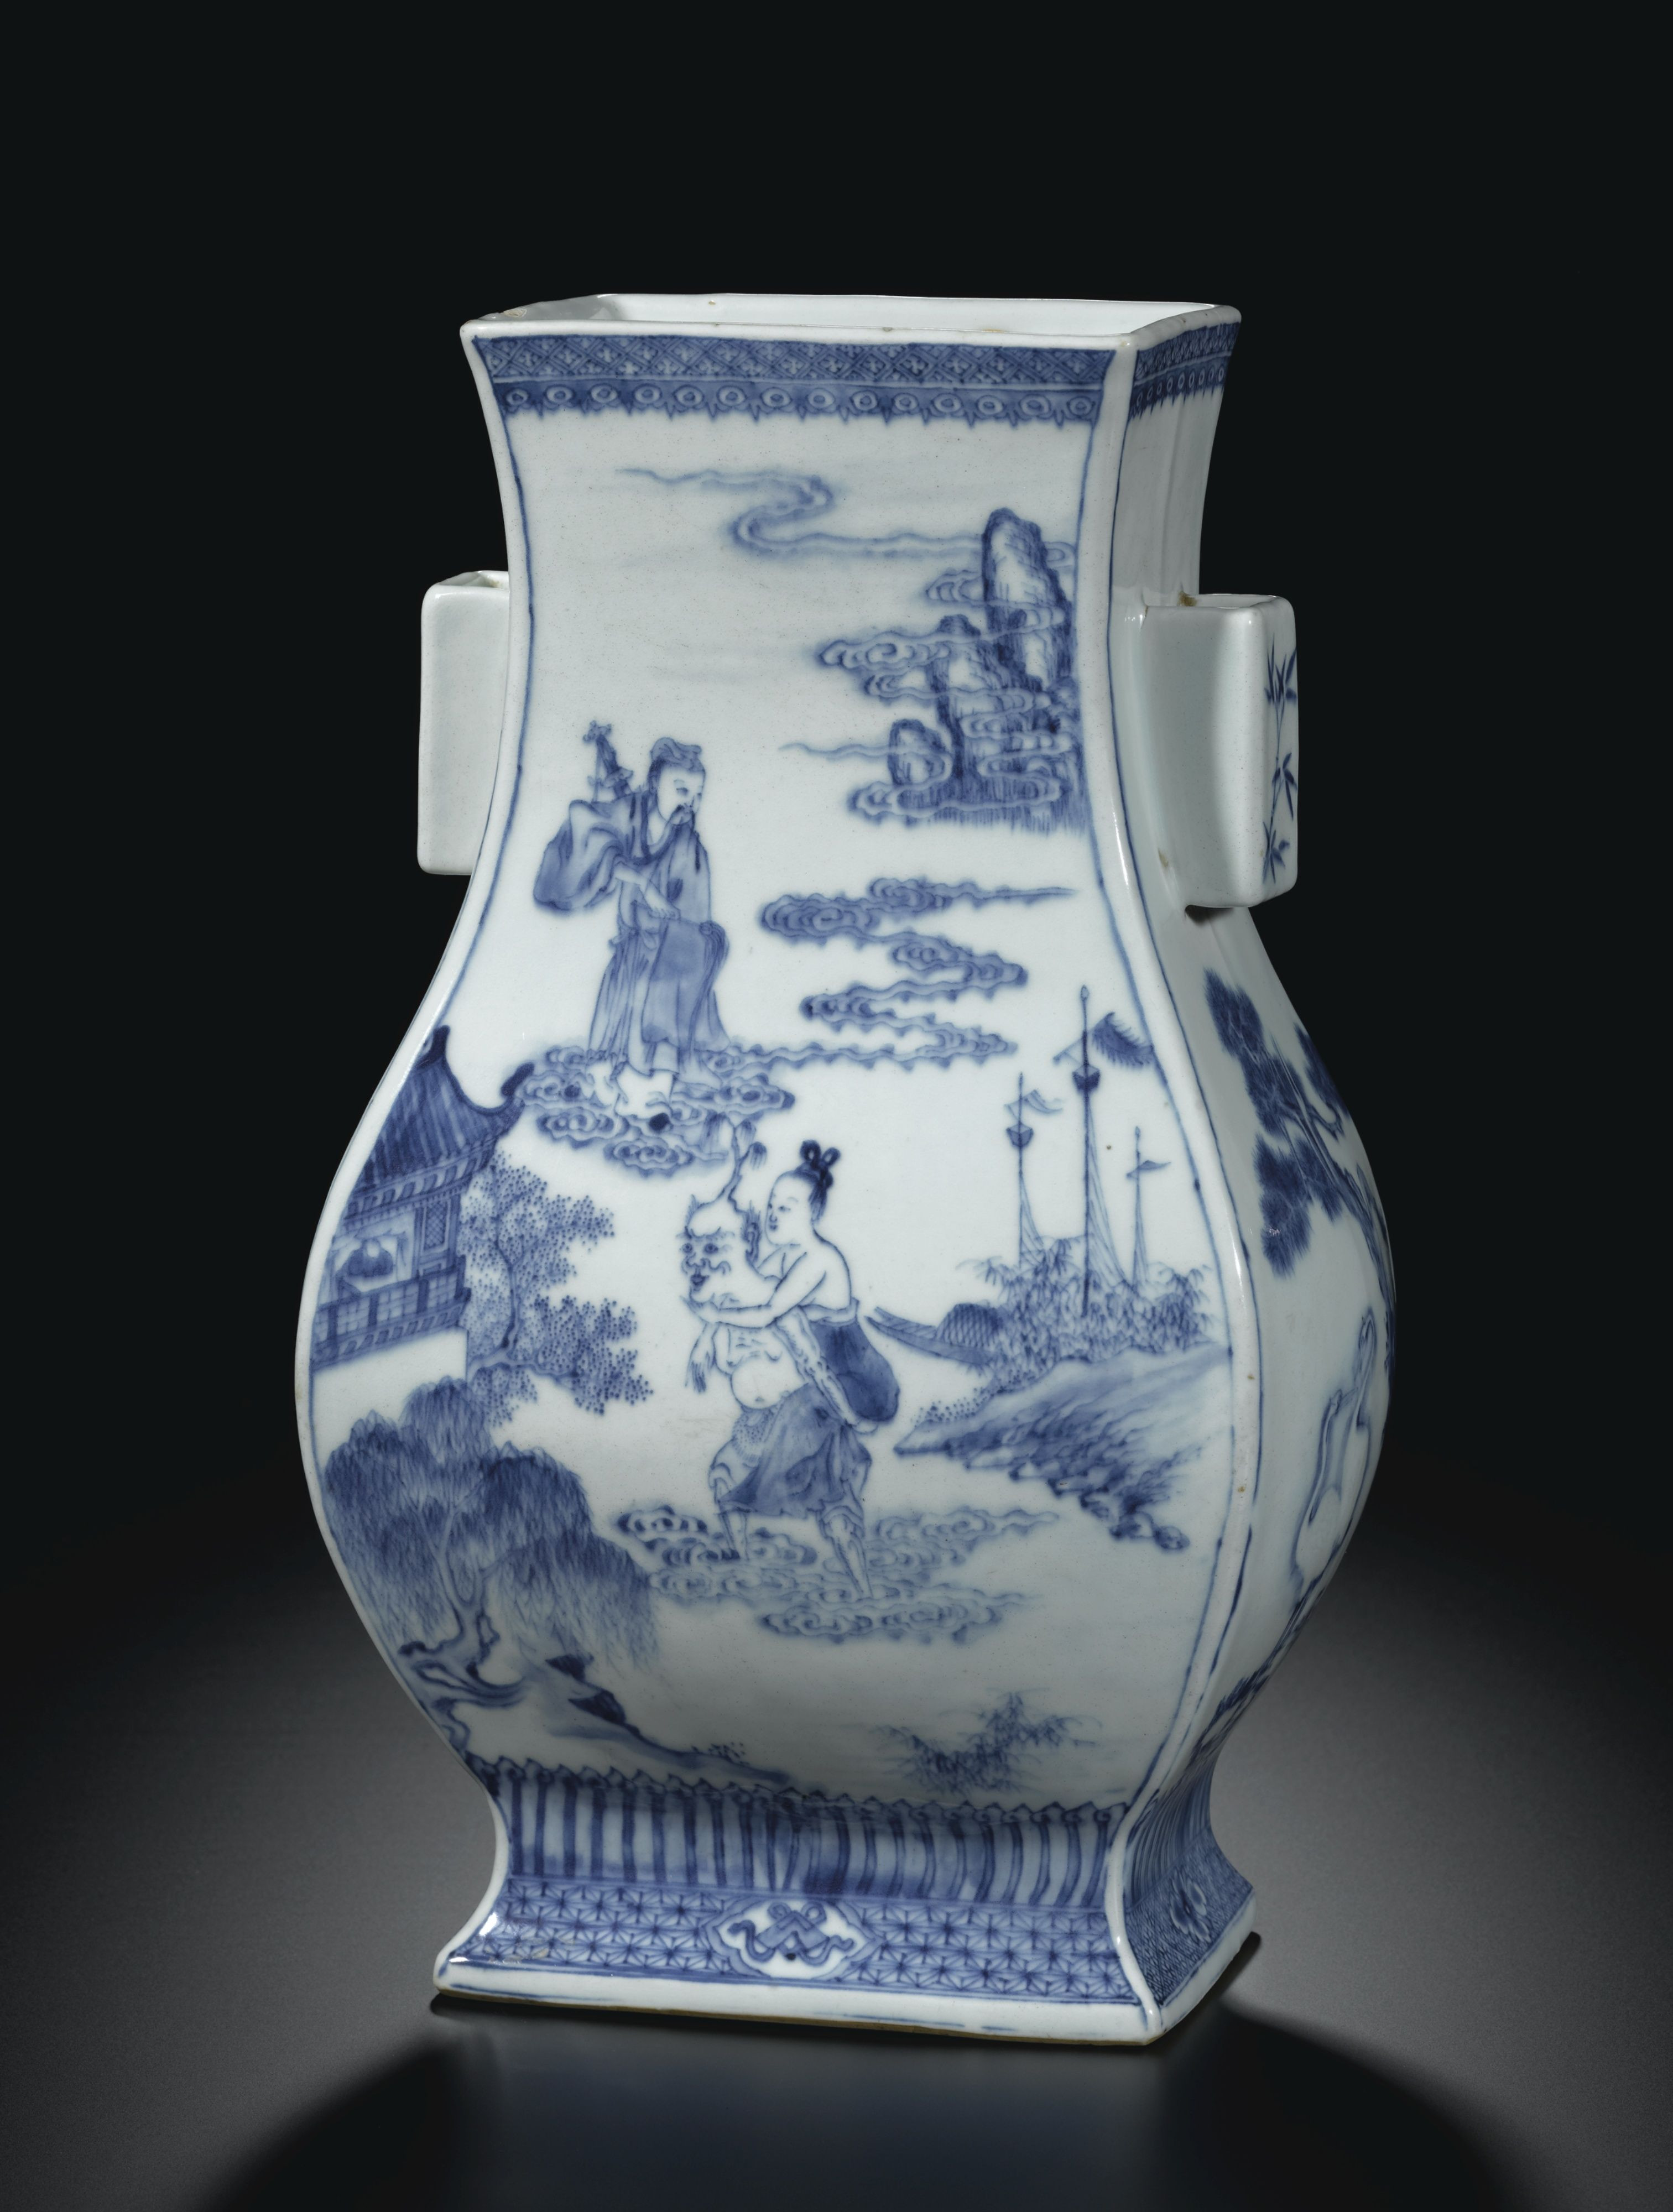 blue china vase of vase sothebys i property from a private collection a blue and for vase sothebys i property from a private collection a blue and white immortals handled vase fanghu qing dynasty 18th century estimate 300000